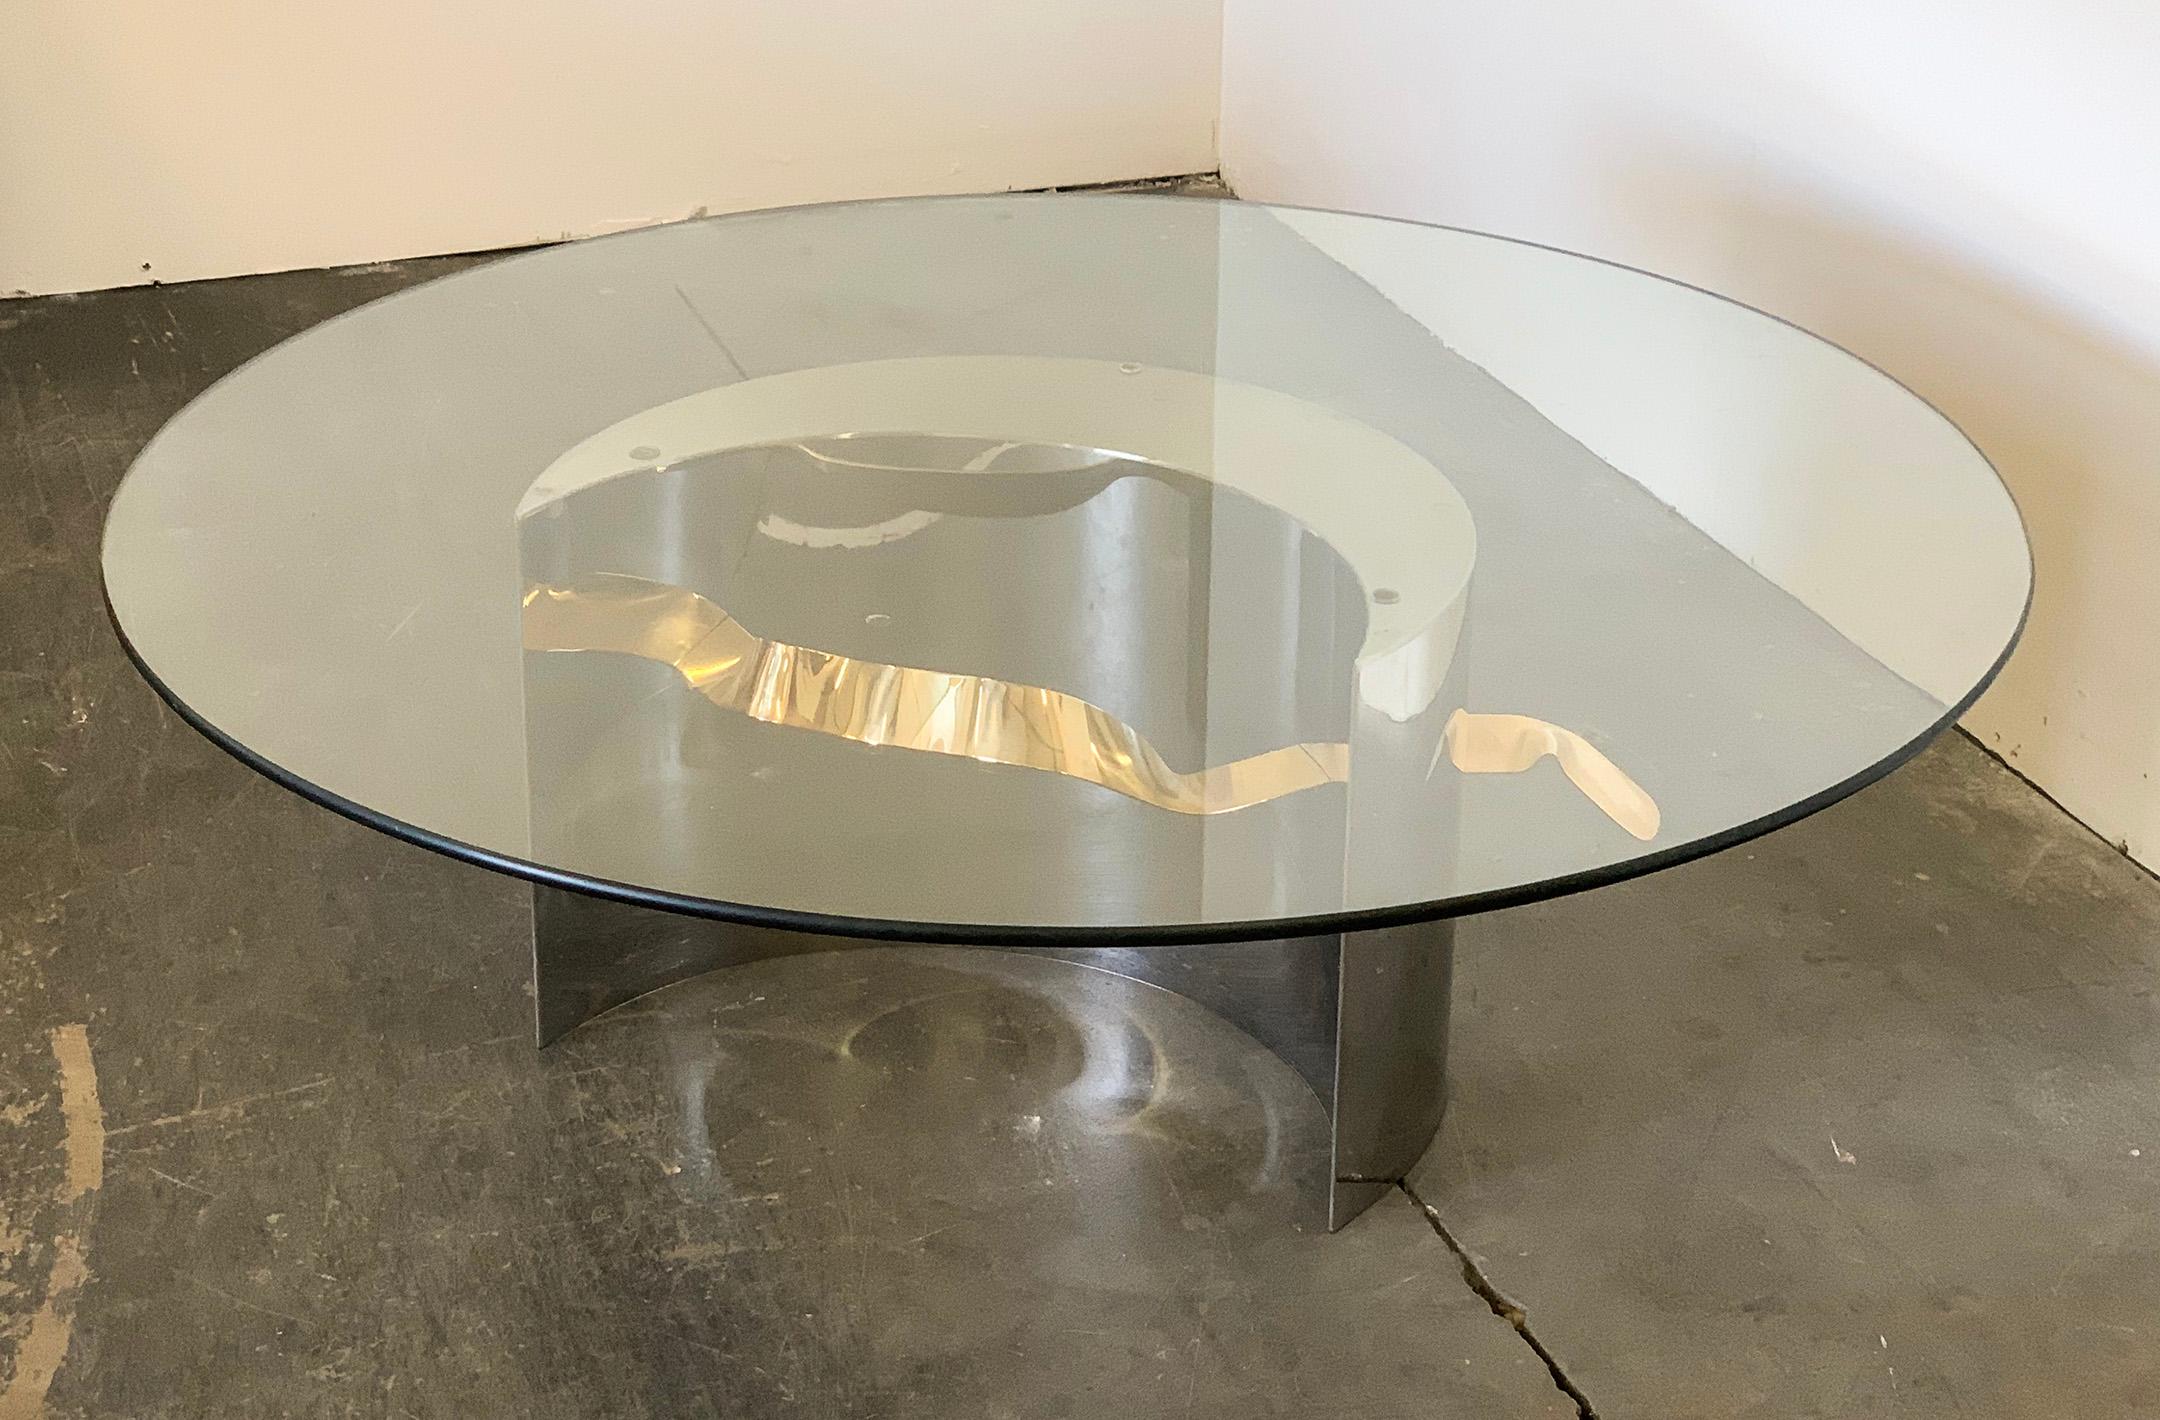 Available right now we have a gorgeous Postmodern dining table that is made of polished stainless and brass. The table features a polished stainless crescent shape, and is set off right with an undulating brass ribbon that goes through the piece.